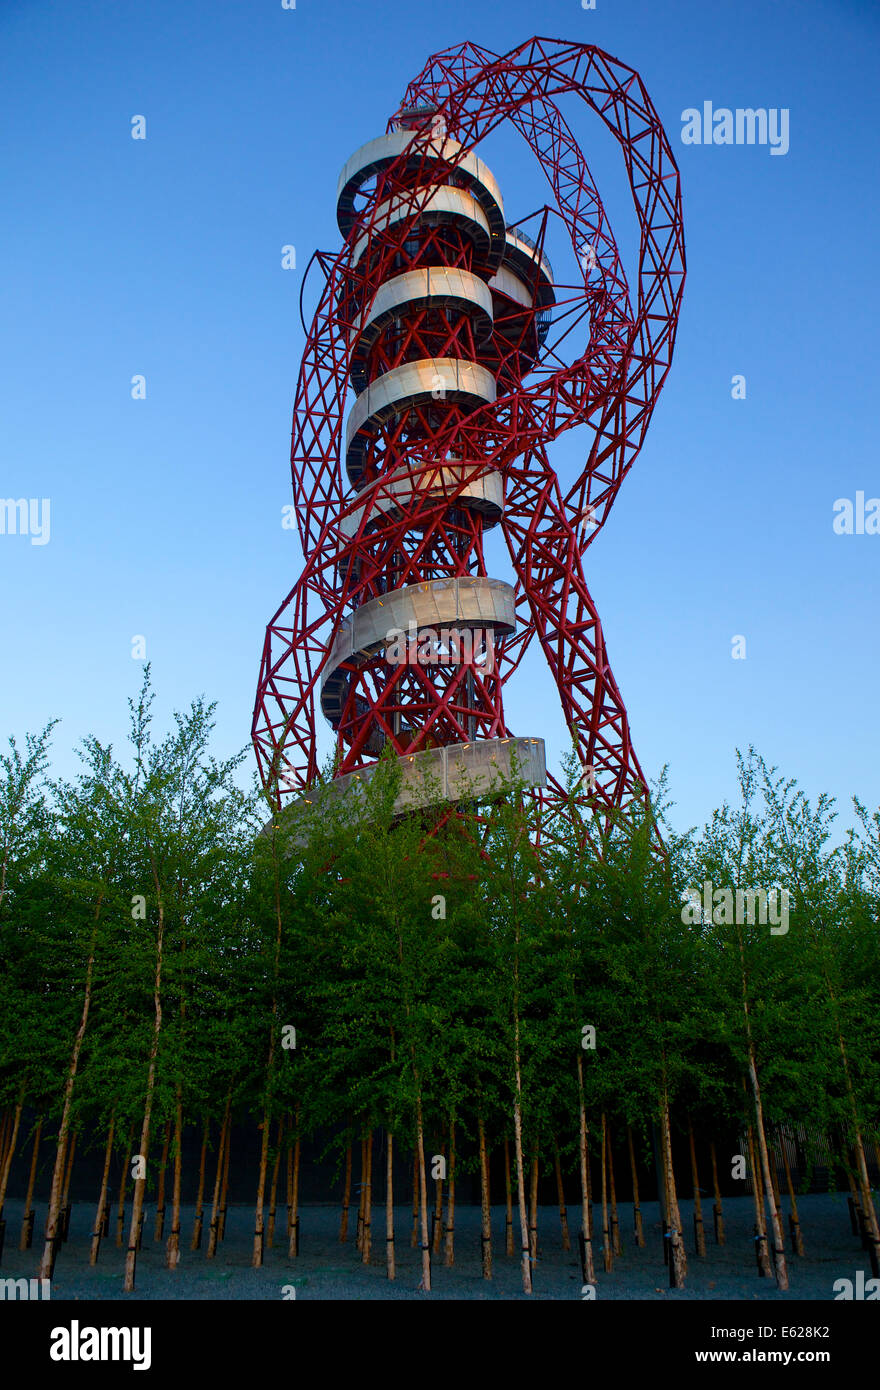 Orbit tower by Arcelor Mittal in the Queen Elizabeth Olympic park Stratford. Stock Photo